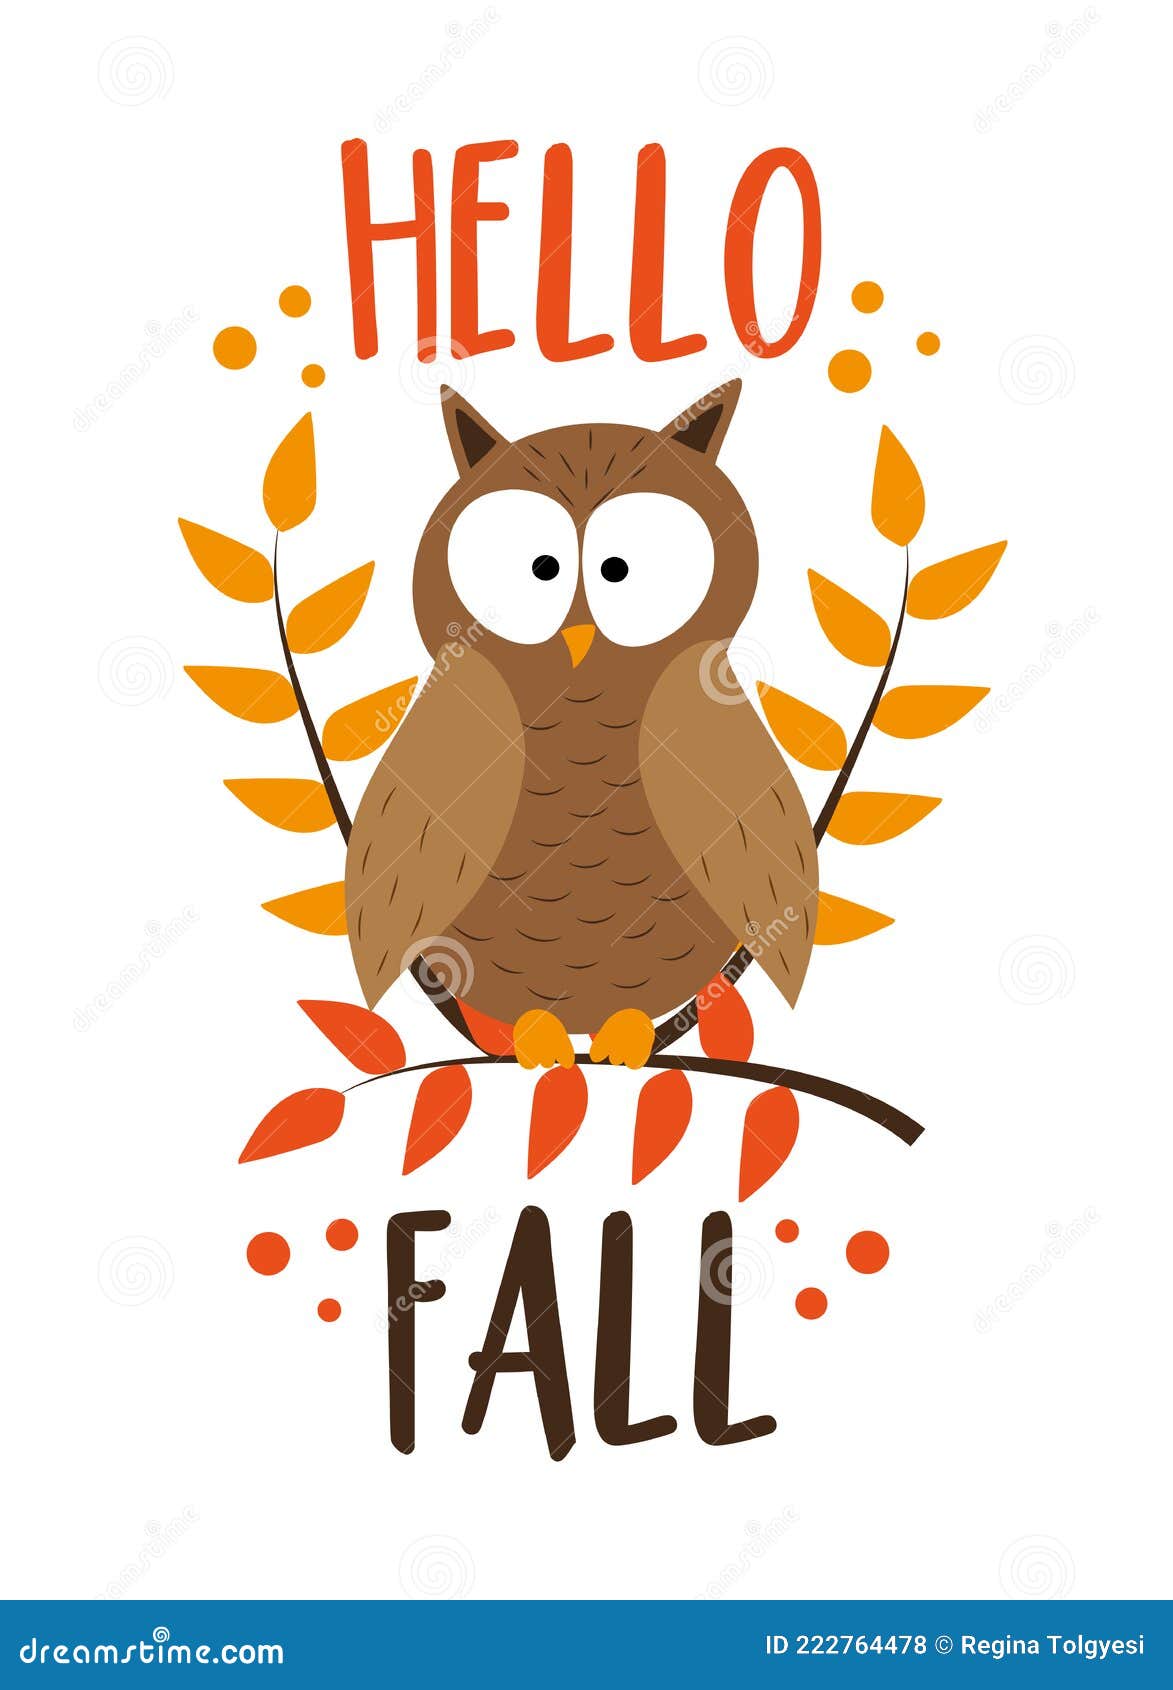 Hello Fall - Autumnal Greeting with Owl on Branch. Stock Vector ...